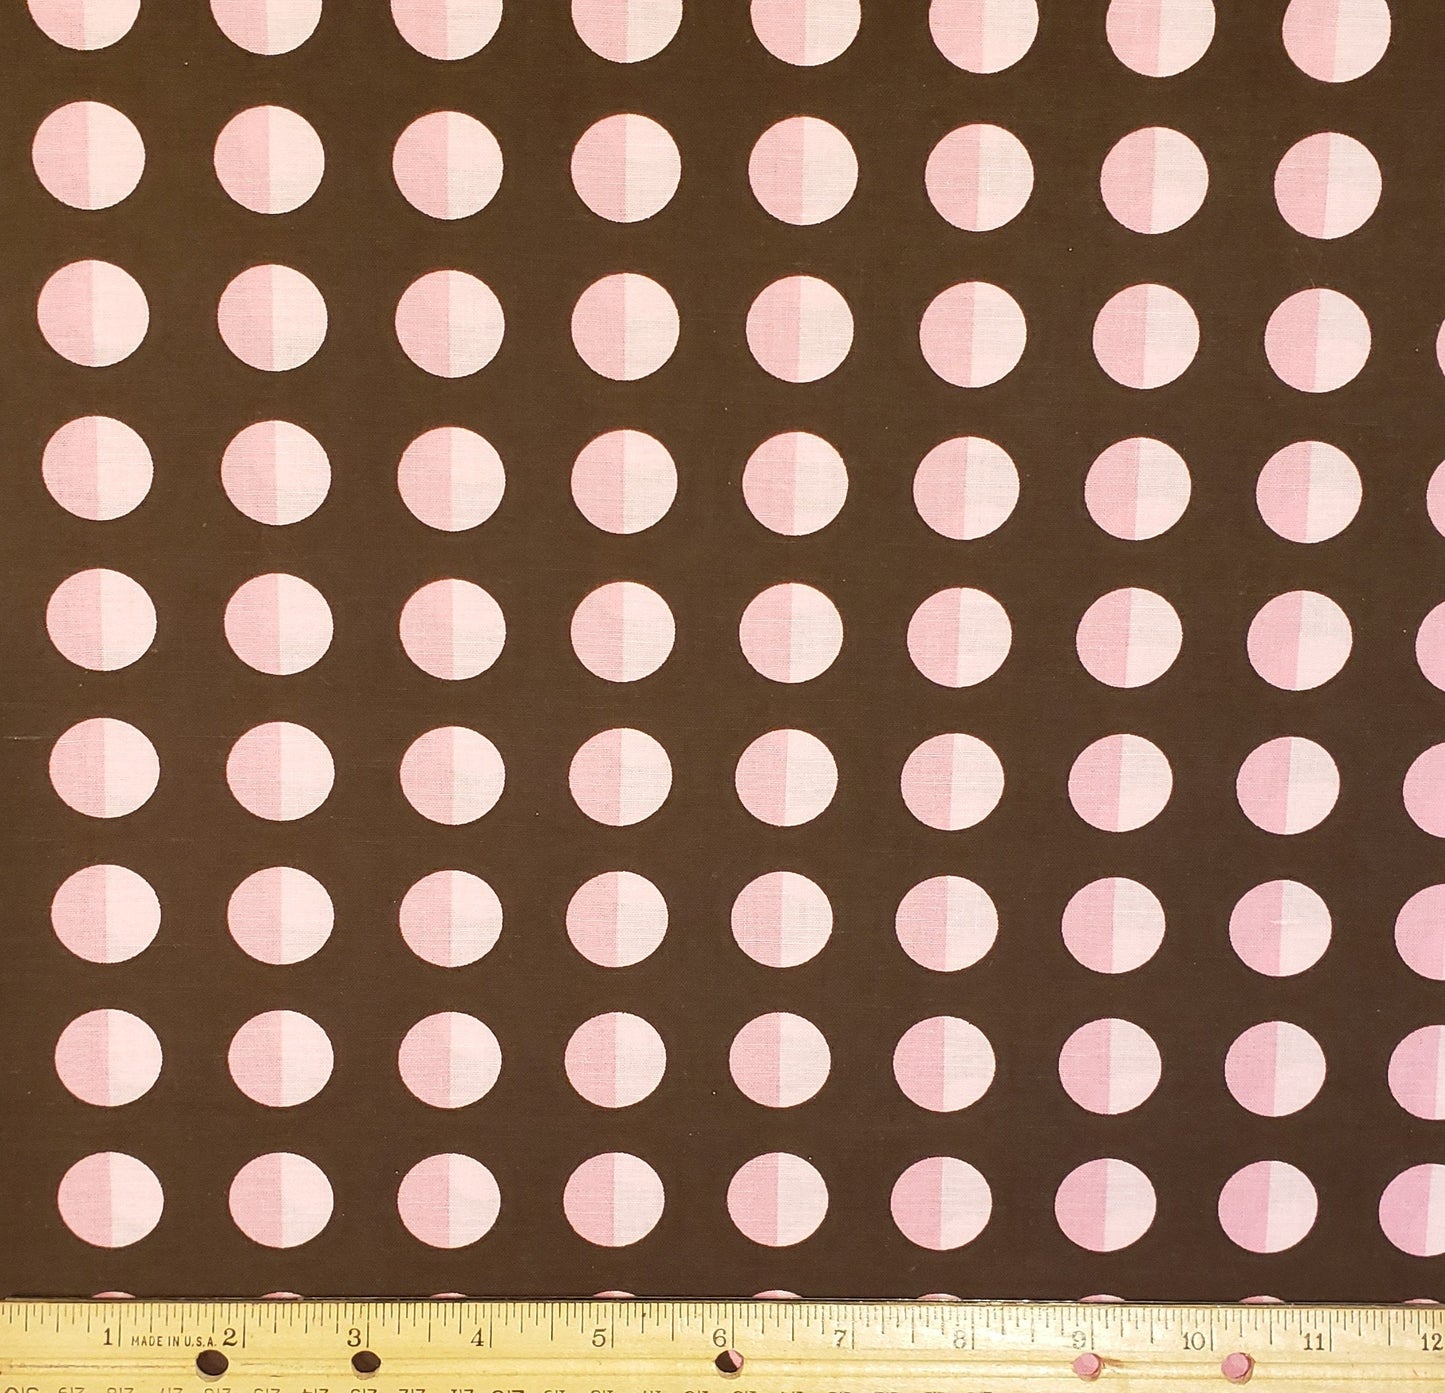 Designed and Produced Exclusively for JoAnn Fabric and Craft Stores - Dark Brown Fabric with Light and Dark Pink Dots